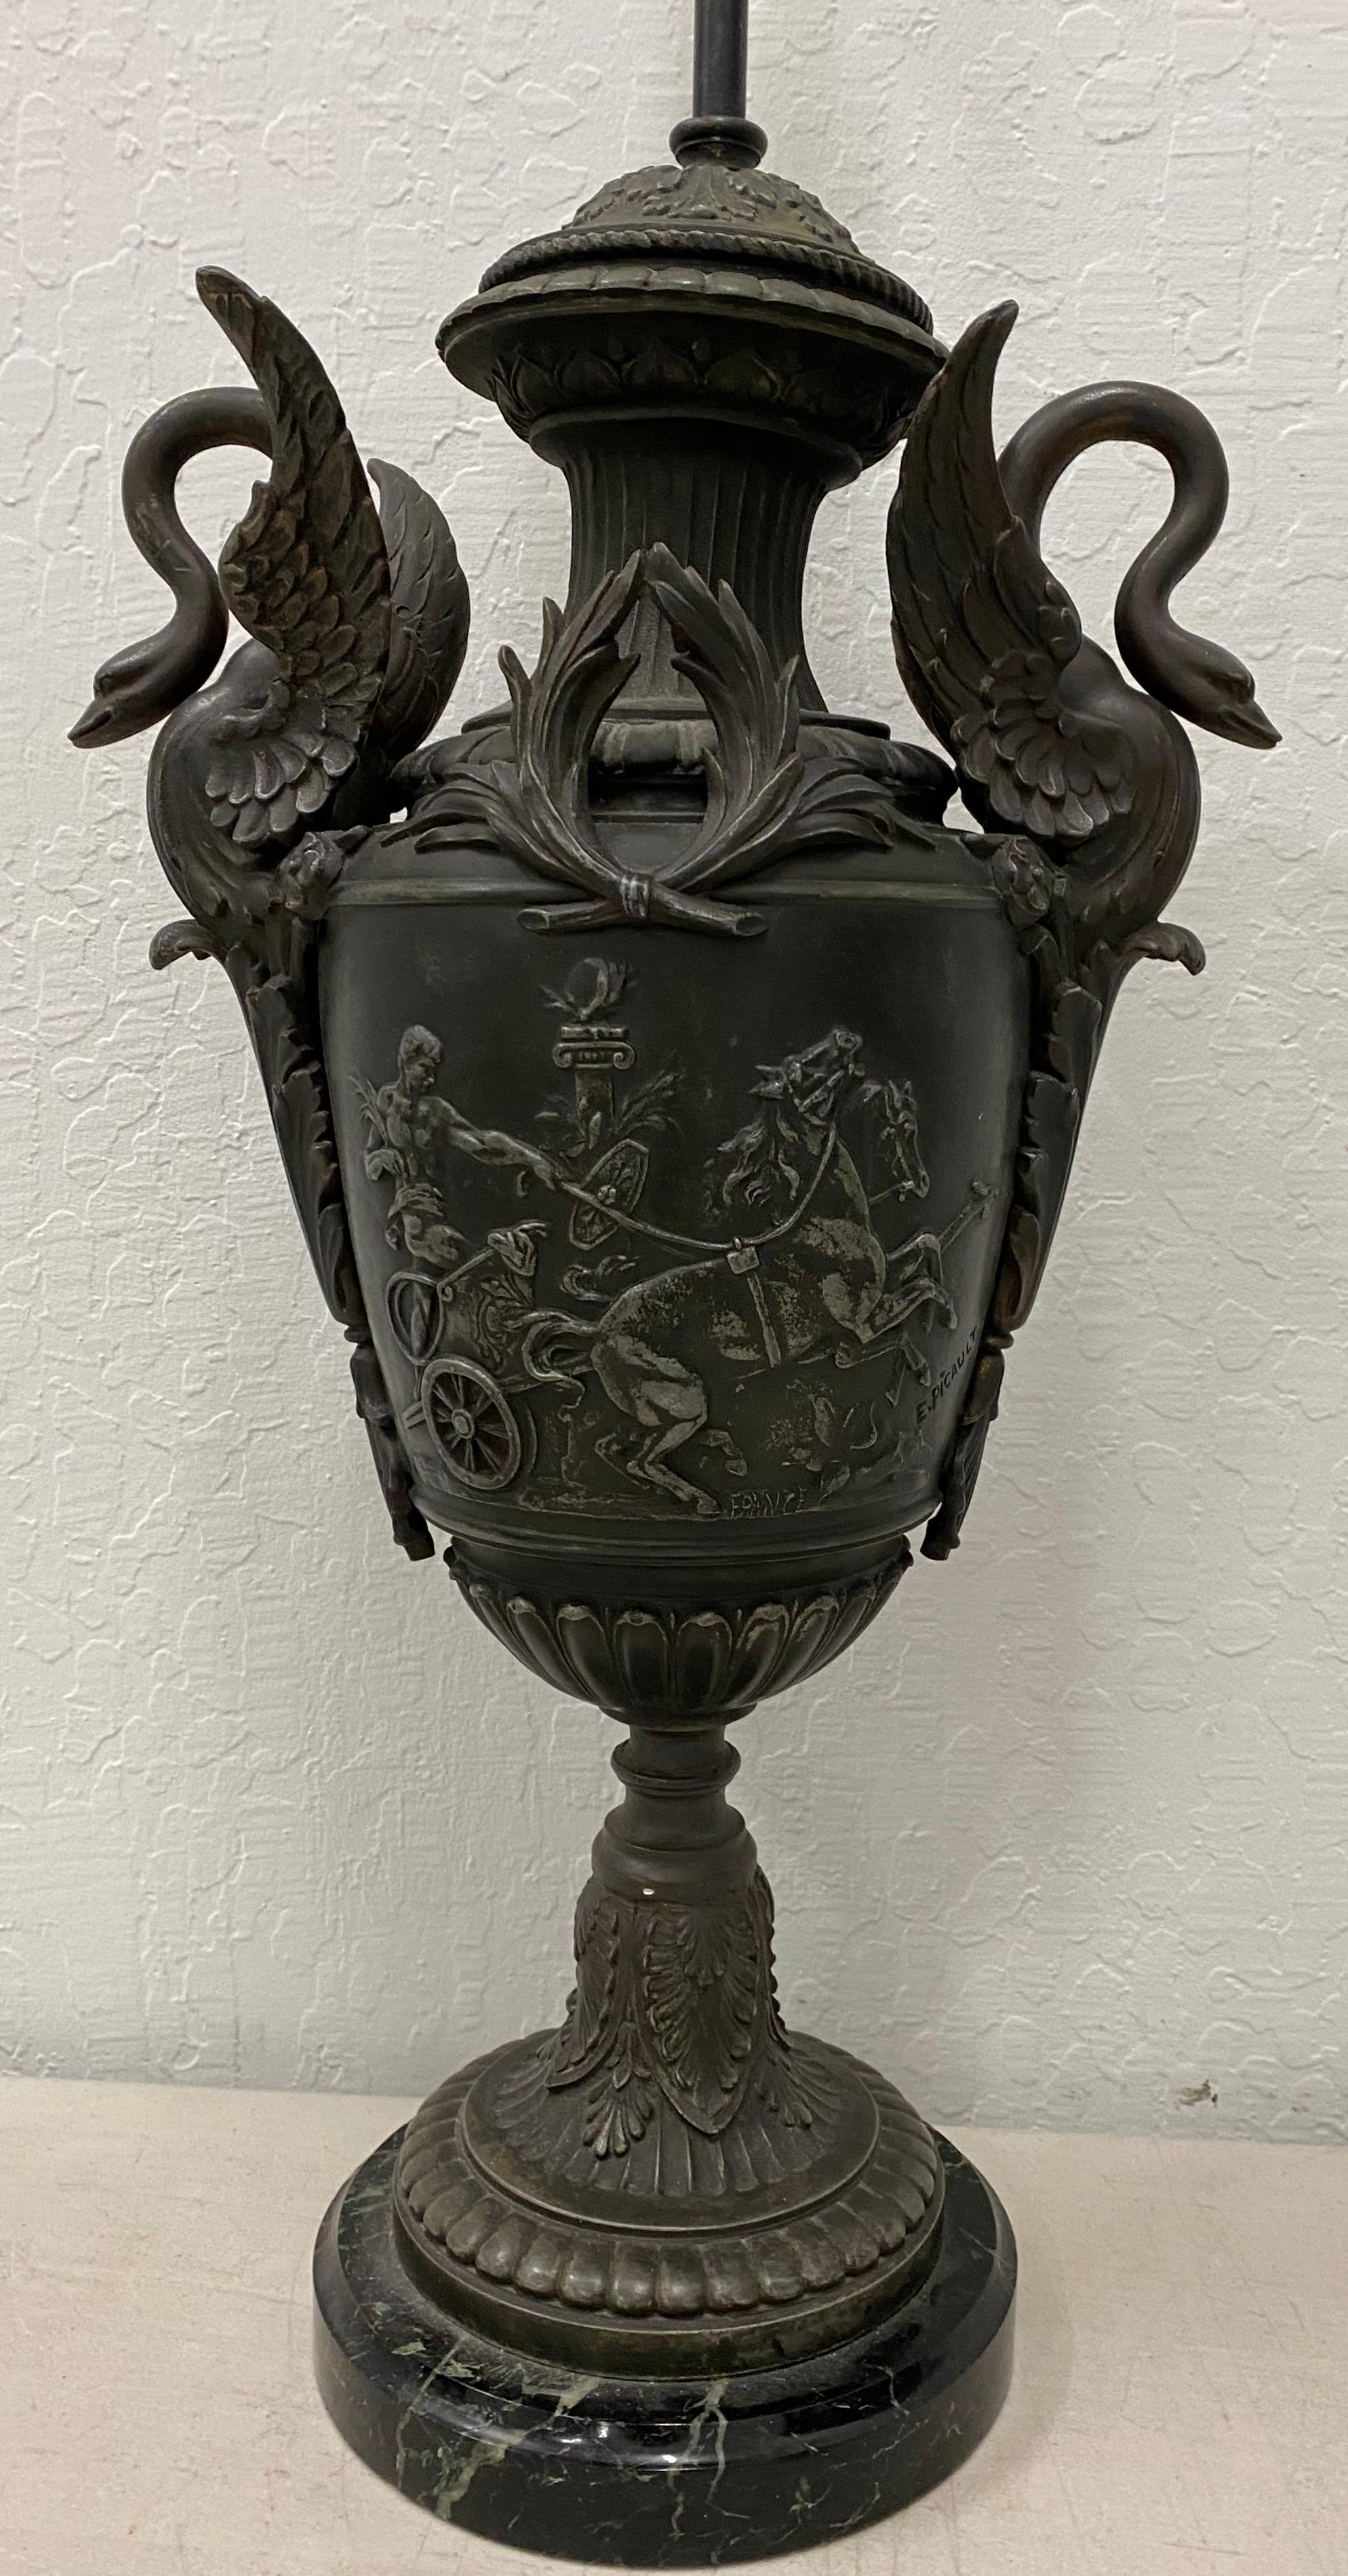 Vintage Classical urn cast metal table lamp, circa 1940s

8